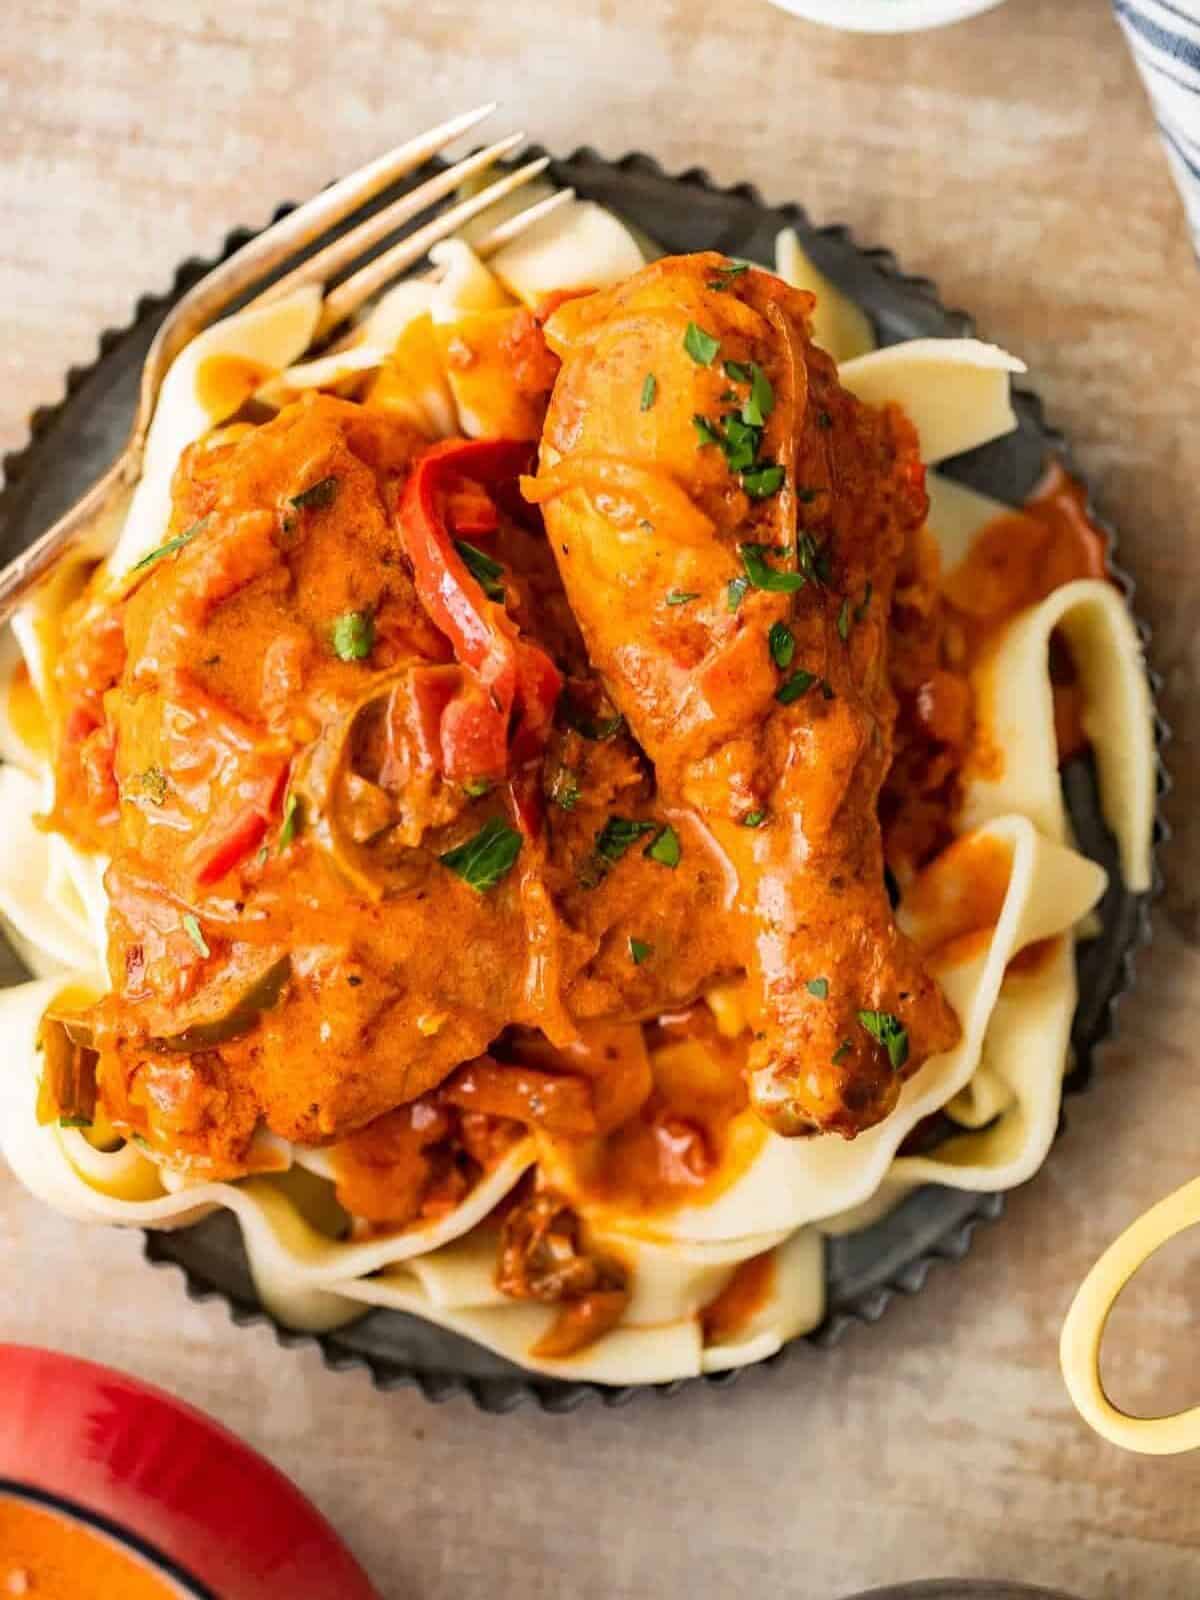 Creamy Chicken Paprikash is a traditional Hungarian Chicken Recipe with so much flavor! This Chicken Paprikash Recipe is unique, vibrant, and delicious.